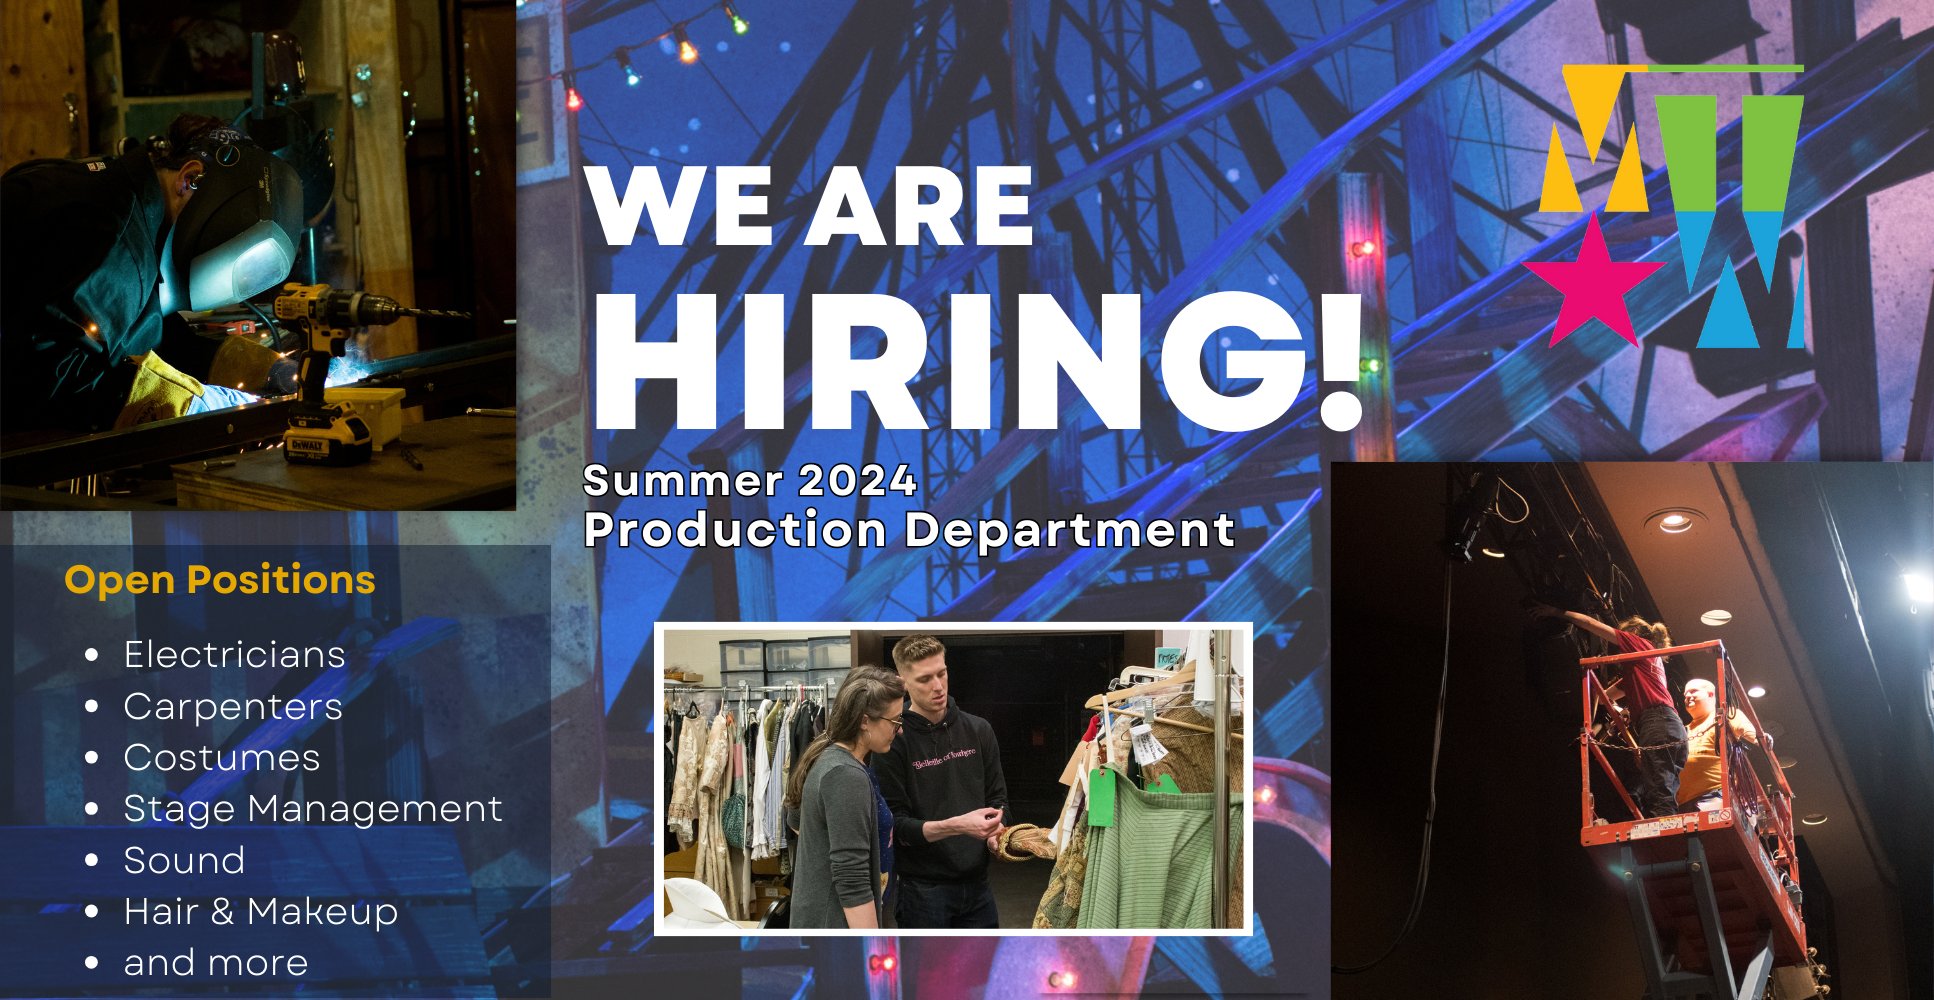 Summer 2024 Production Department Hiring (1934 x 1000 px)